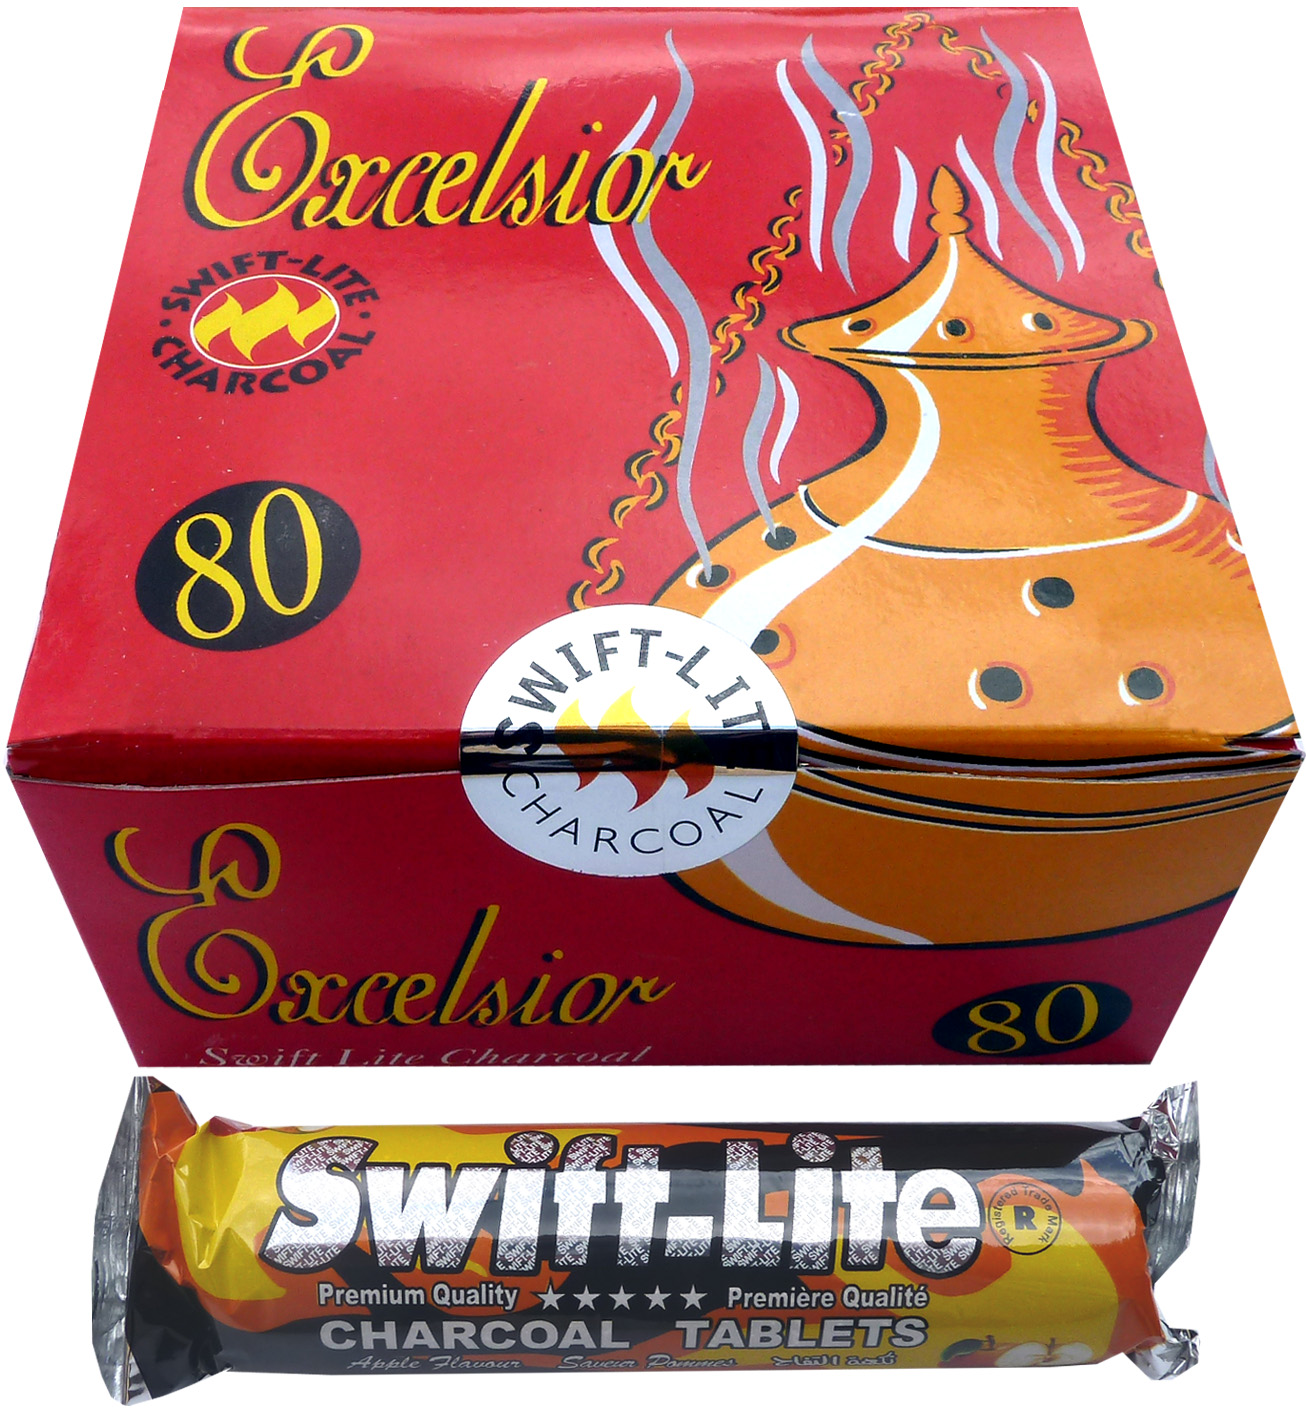 Swift lite Excelsior charcoal 33/80